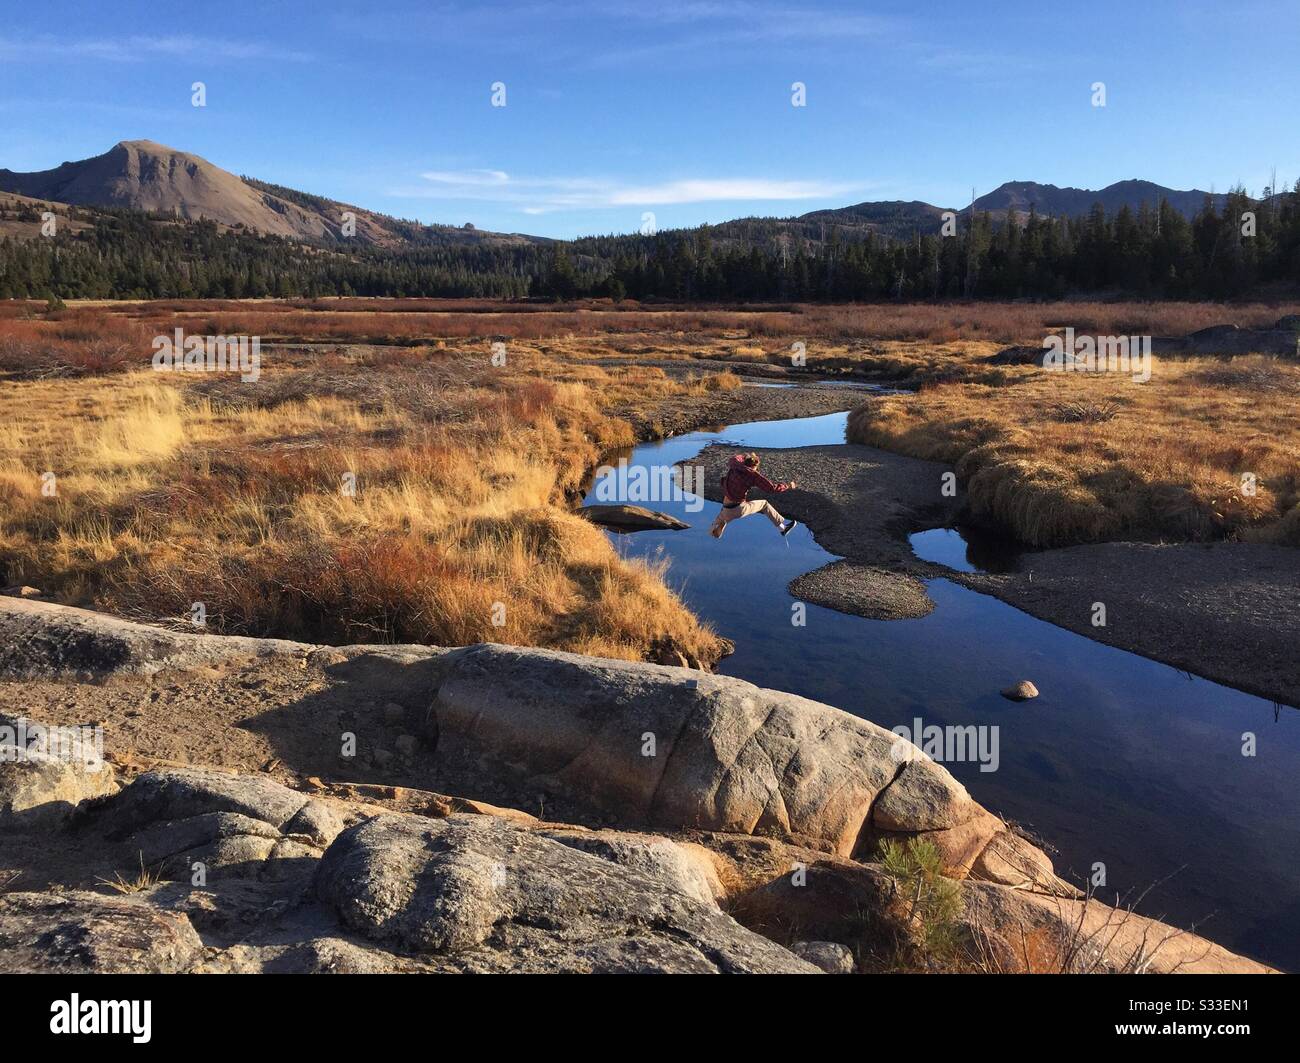 A boy jumps across a river winding through a valley with mountains in the distance. Stock Photo